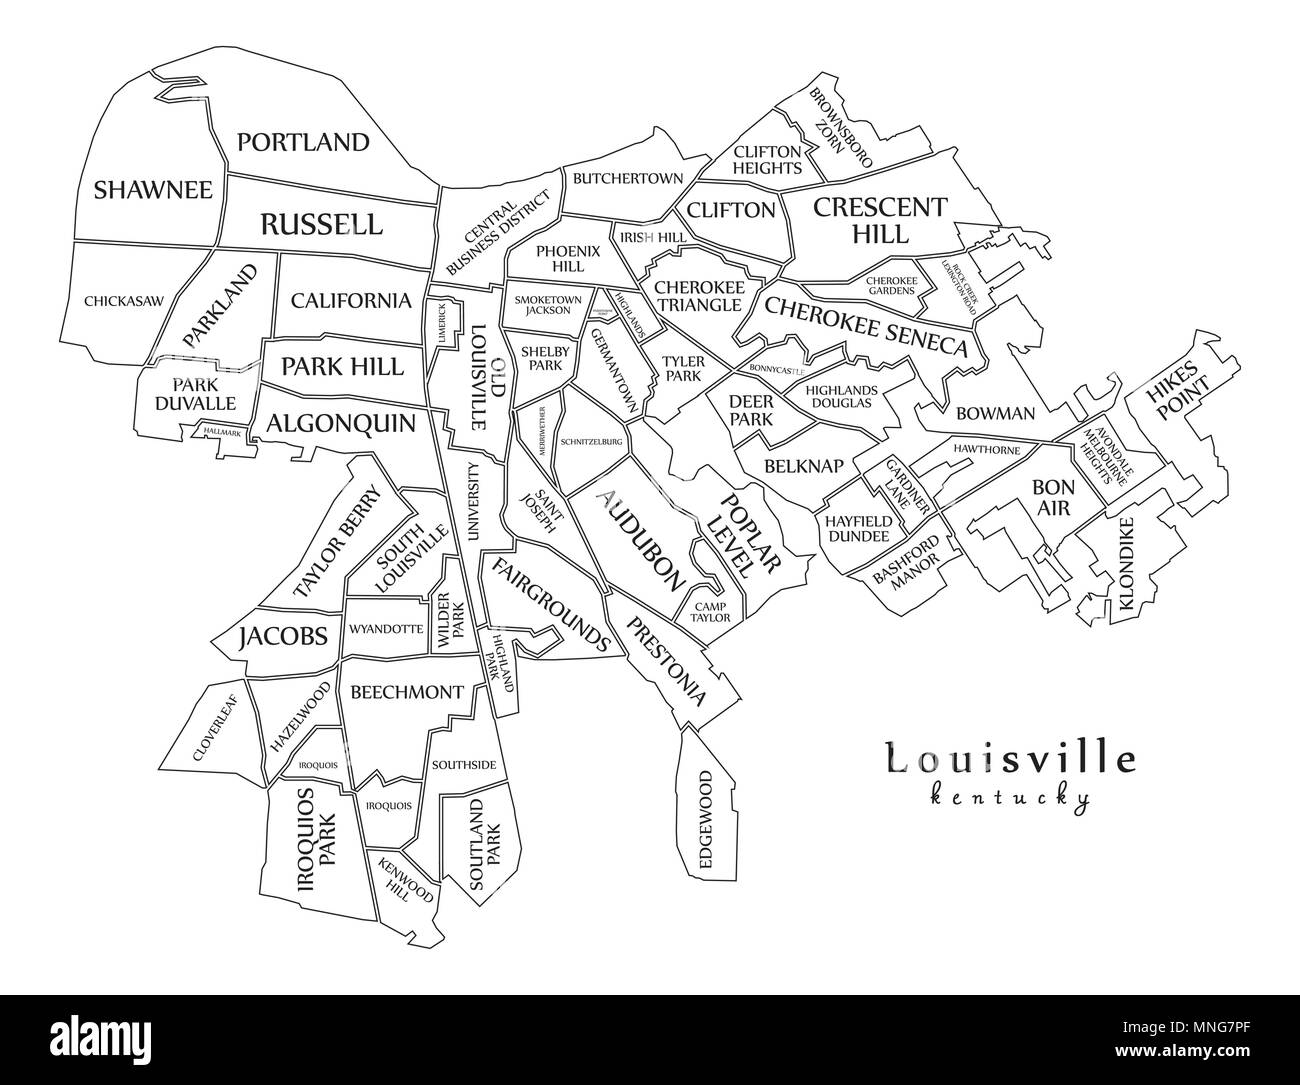 Frankfort Kentucky City Map Founded 1786 University of Louisville Color  Palette T-Shirt by Design Turnpike - Instaprints